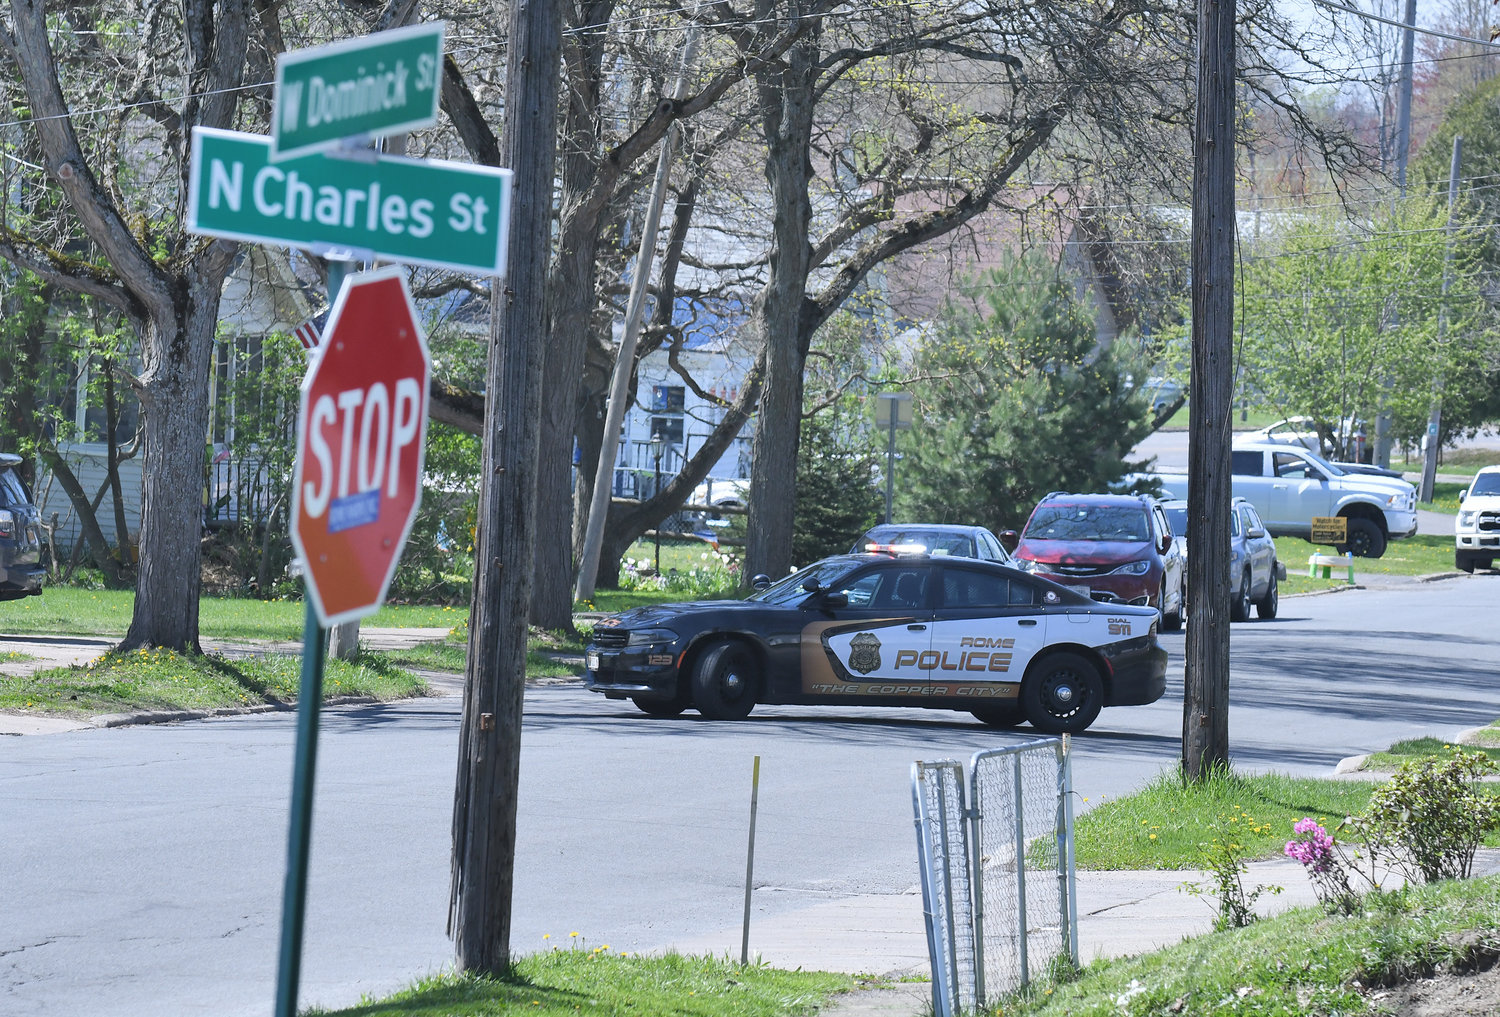 Rome Police investigate a shots fired incident on West Dominick Street, between North Charles and Watson streets, Tuesday. The incident was the topic of neighbor complaints made about different incidents and reports about suspicious activity in the area before councilors at Wednesday’s Rome Common Council meeting.